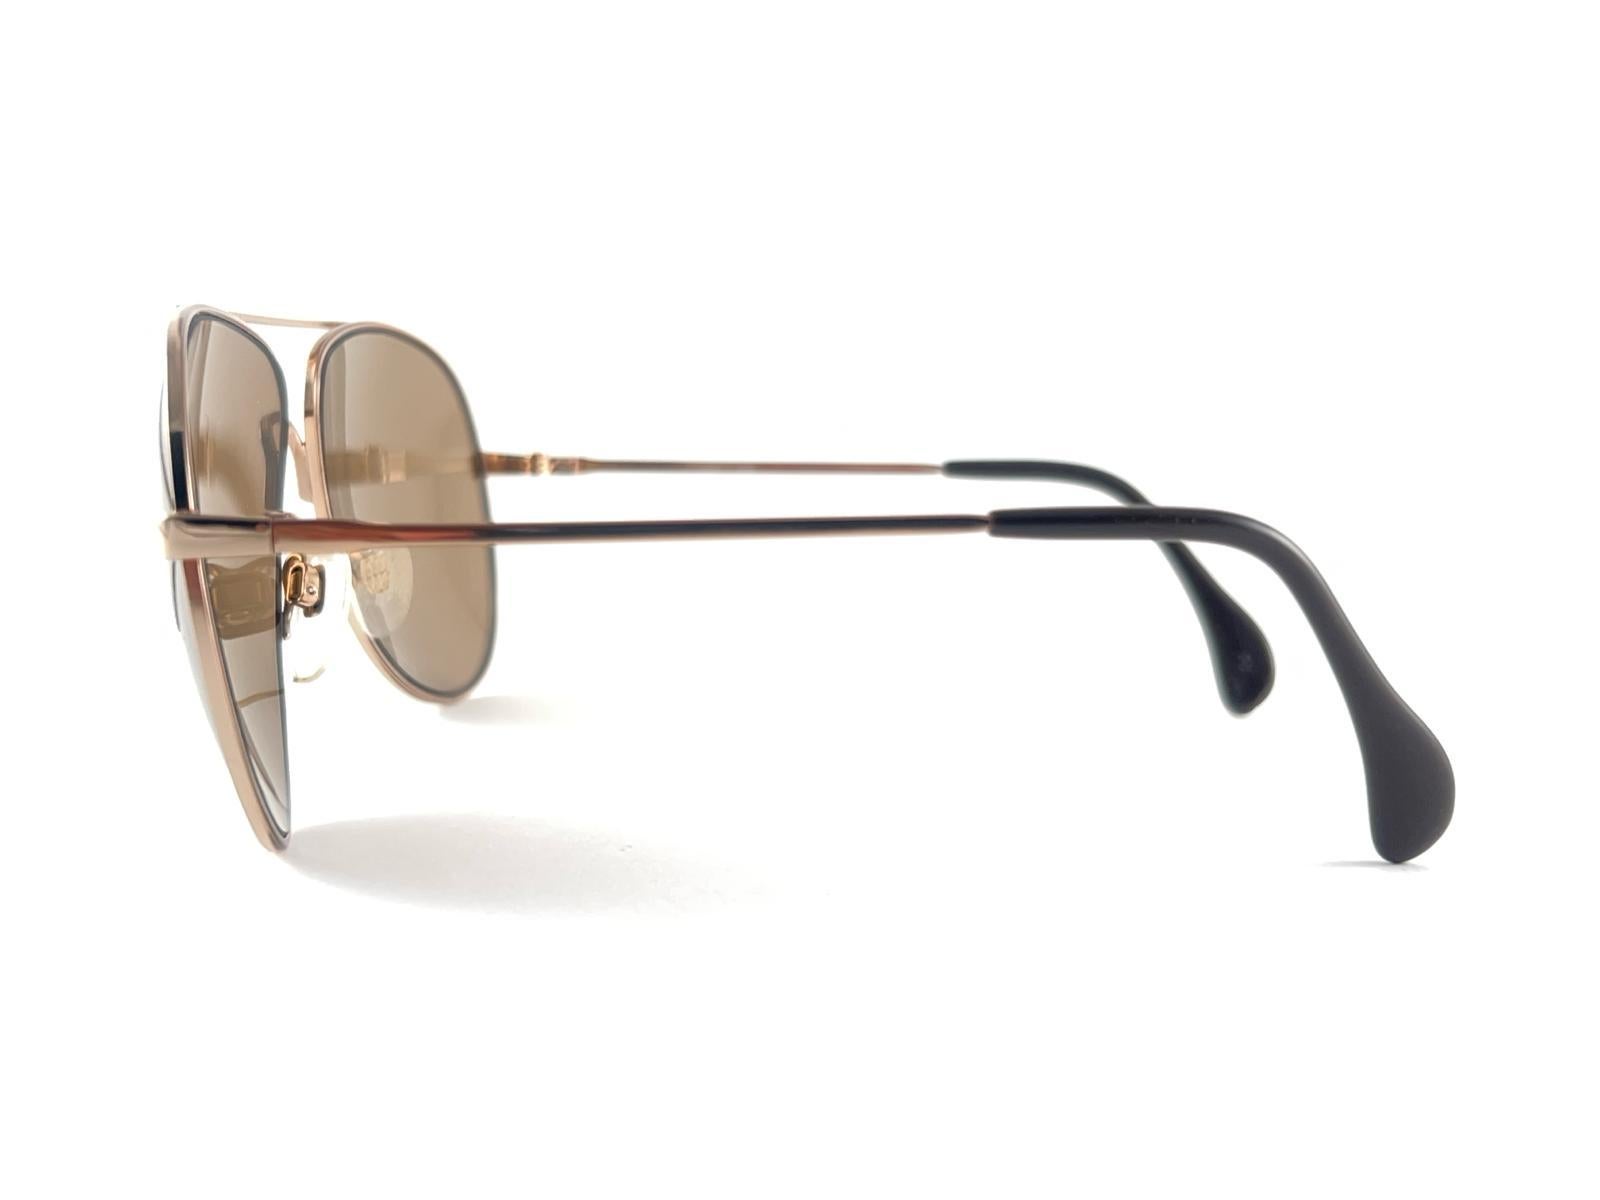 Cool New Vintage 707 Menrad Aviator Light Gold Frame With Medium Brown Lenses.
Please Note That This Beauties Are 40 Years Old And May Have Minor Sign Of Wear Due To Storage. 
Superb Quality,  Even Better Design

New, Never Worn Or Displayed 


Made